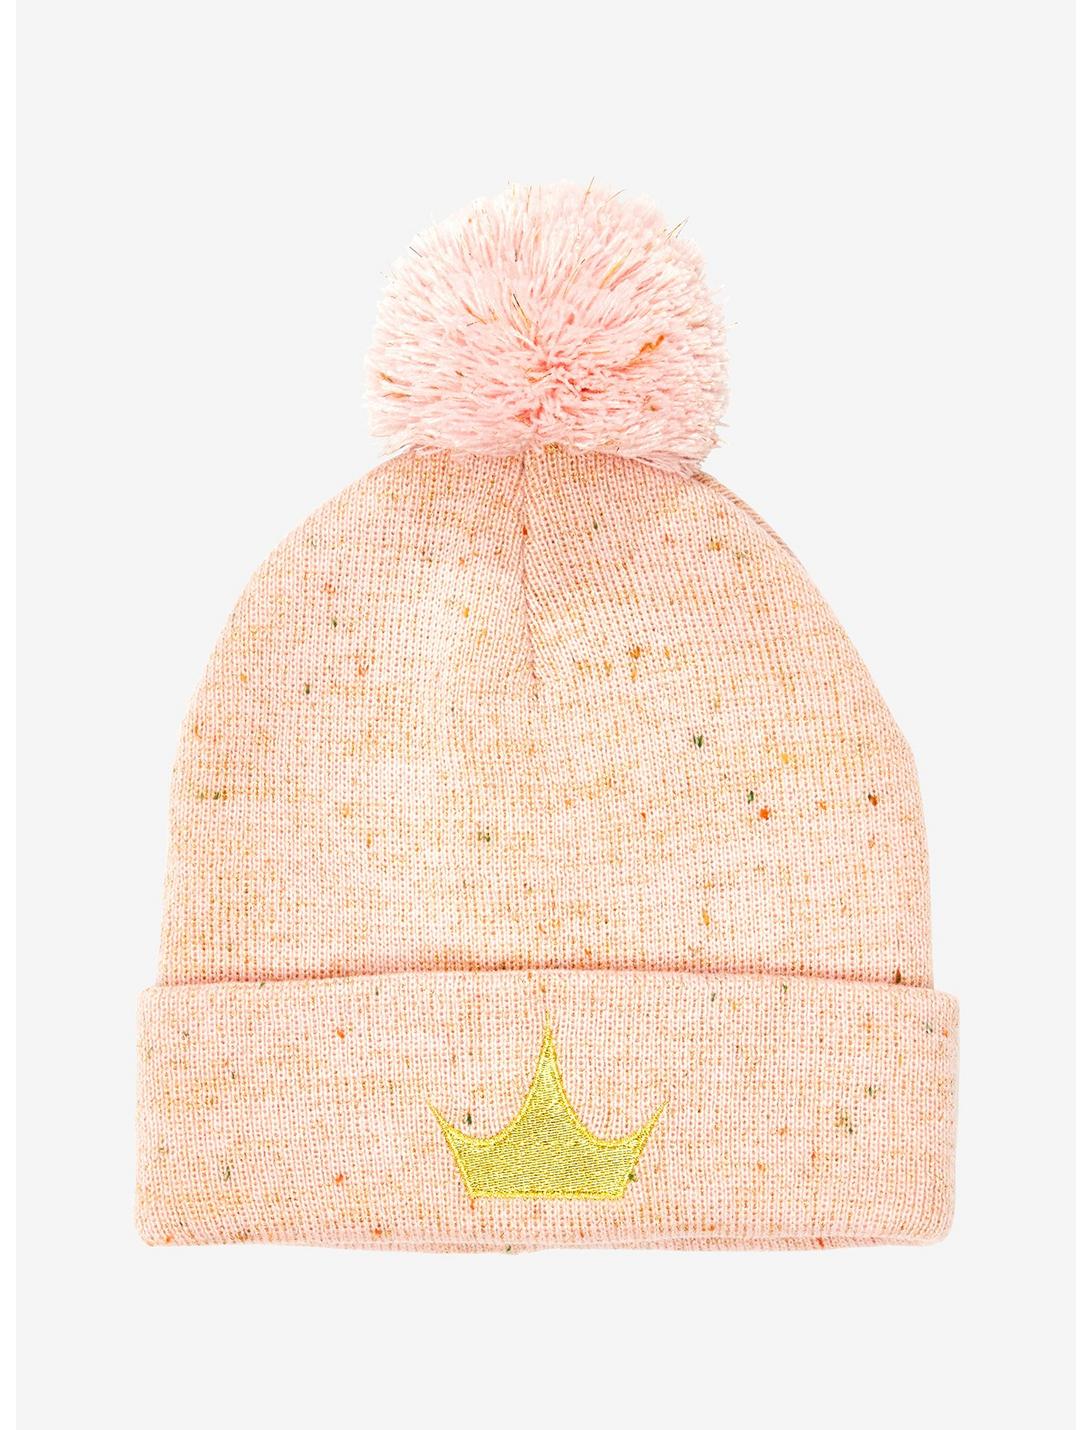 Disney Princess Youth Pom Beanie - BoxLunch Exclusive, , hi-res